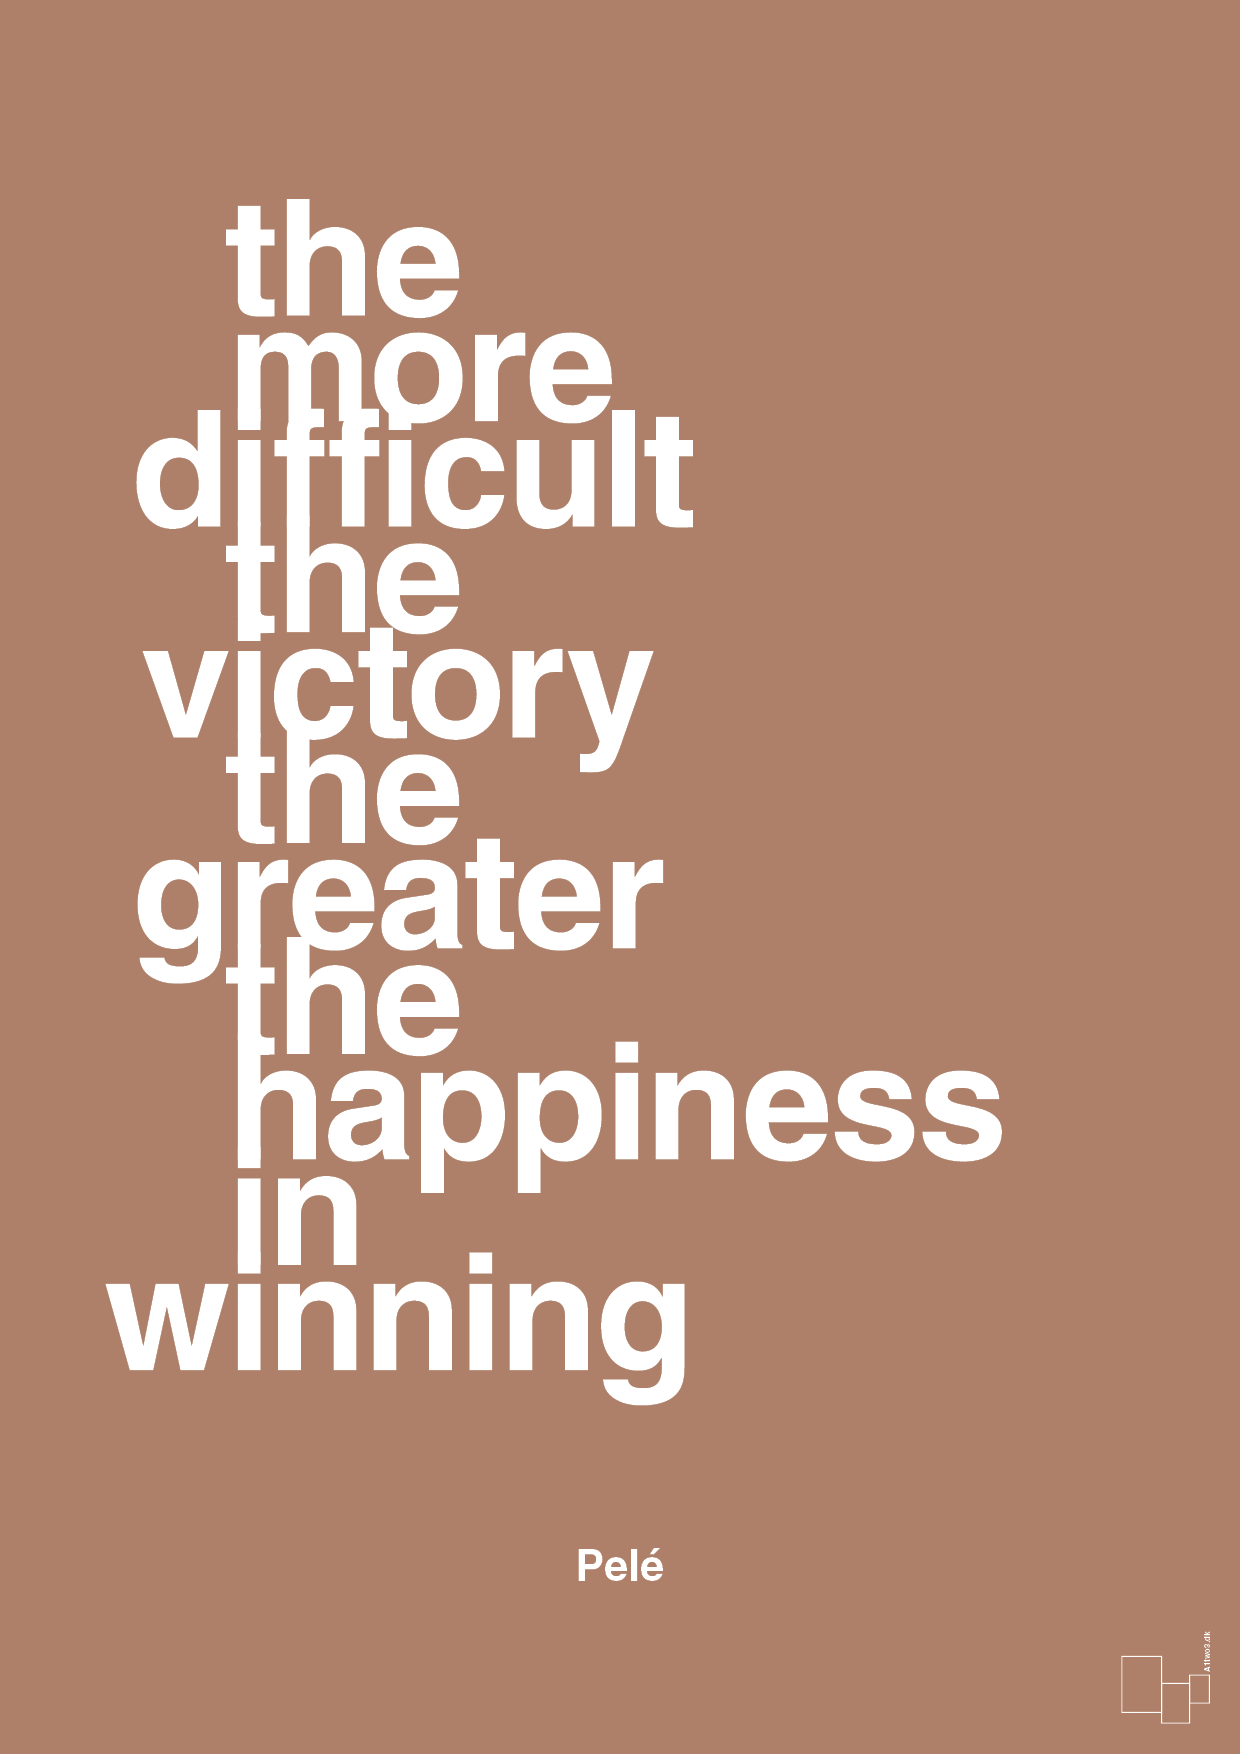 the more difficult the victory the greater the happiness in winning - Plakat med Citater i Cider Spice